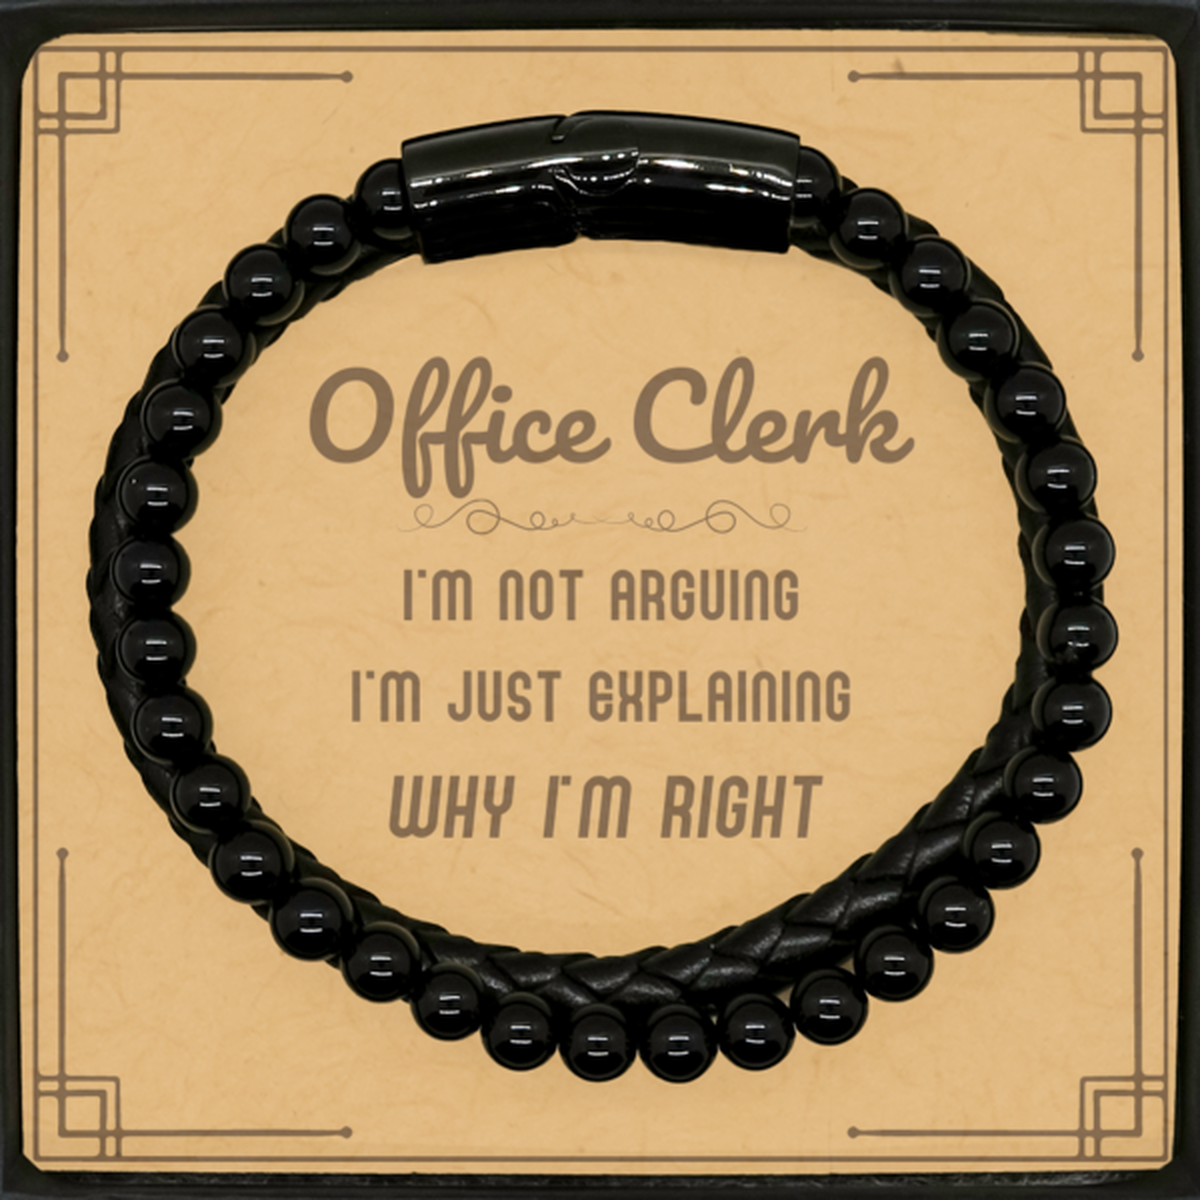 Office Clerk I'm not Arguing. I'm Just Explaining Why I'm RIGHT Stone Leather Bracelets, Funny Saying Quote Office Clerk Gifts For Office Clerk Message Card Graduation Birthday Christmas Gifts for Men Women Coworker